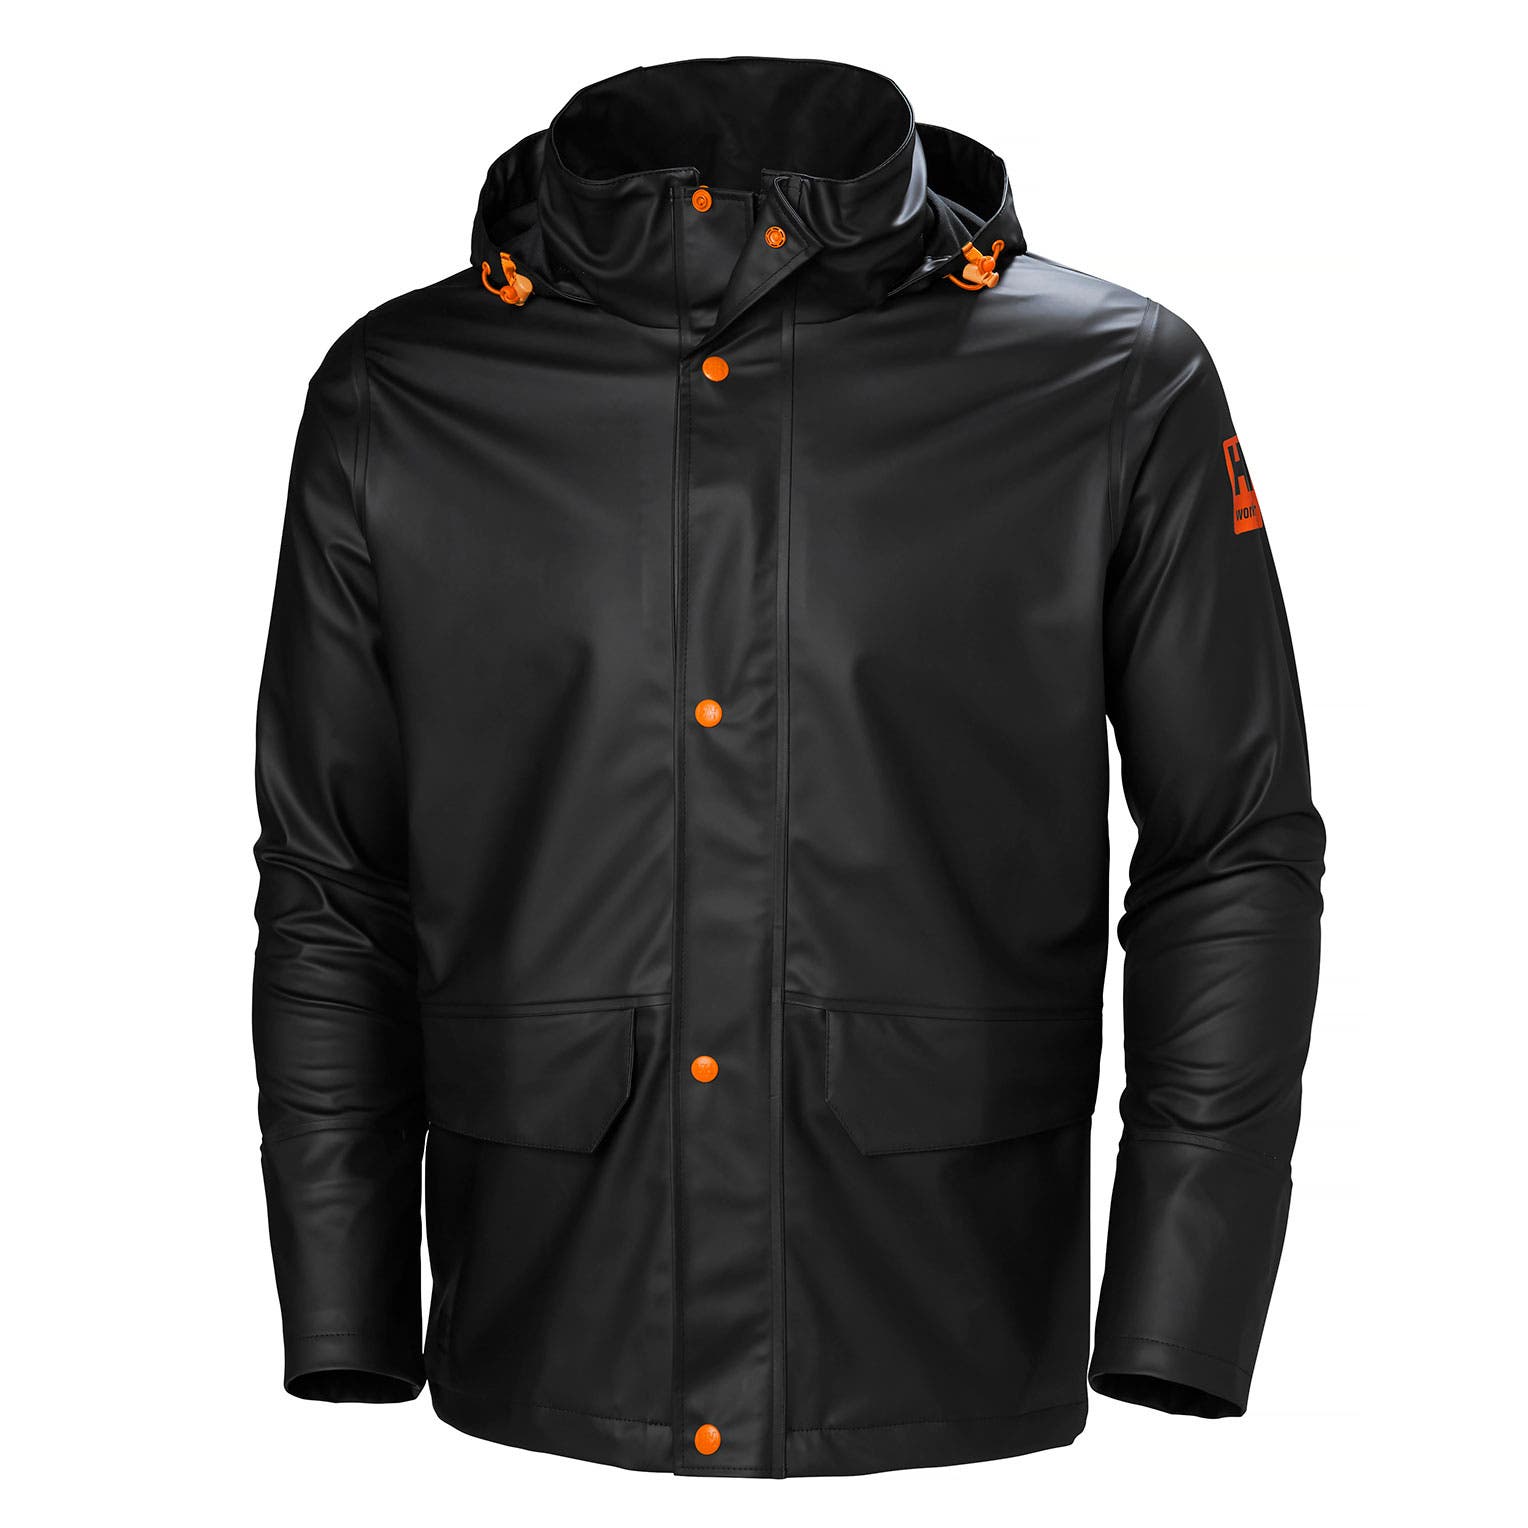 Helly Hansen Men's Gale Rain Jacket in Black from the front